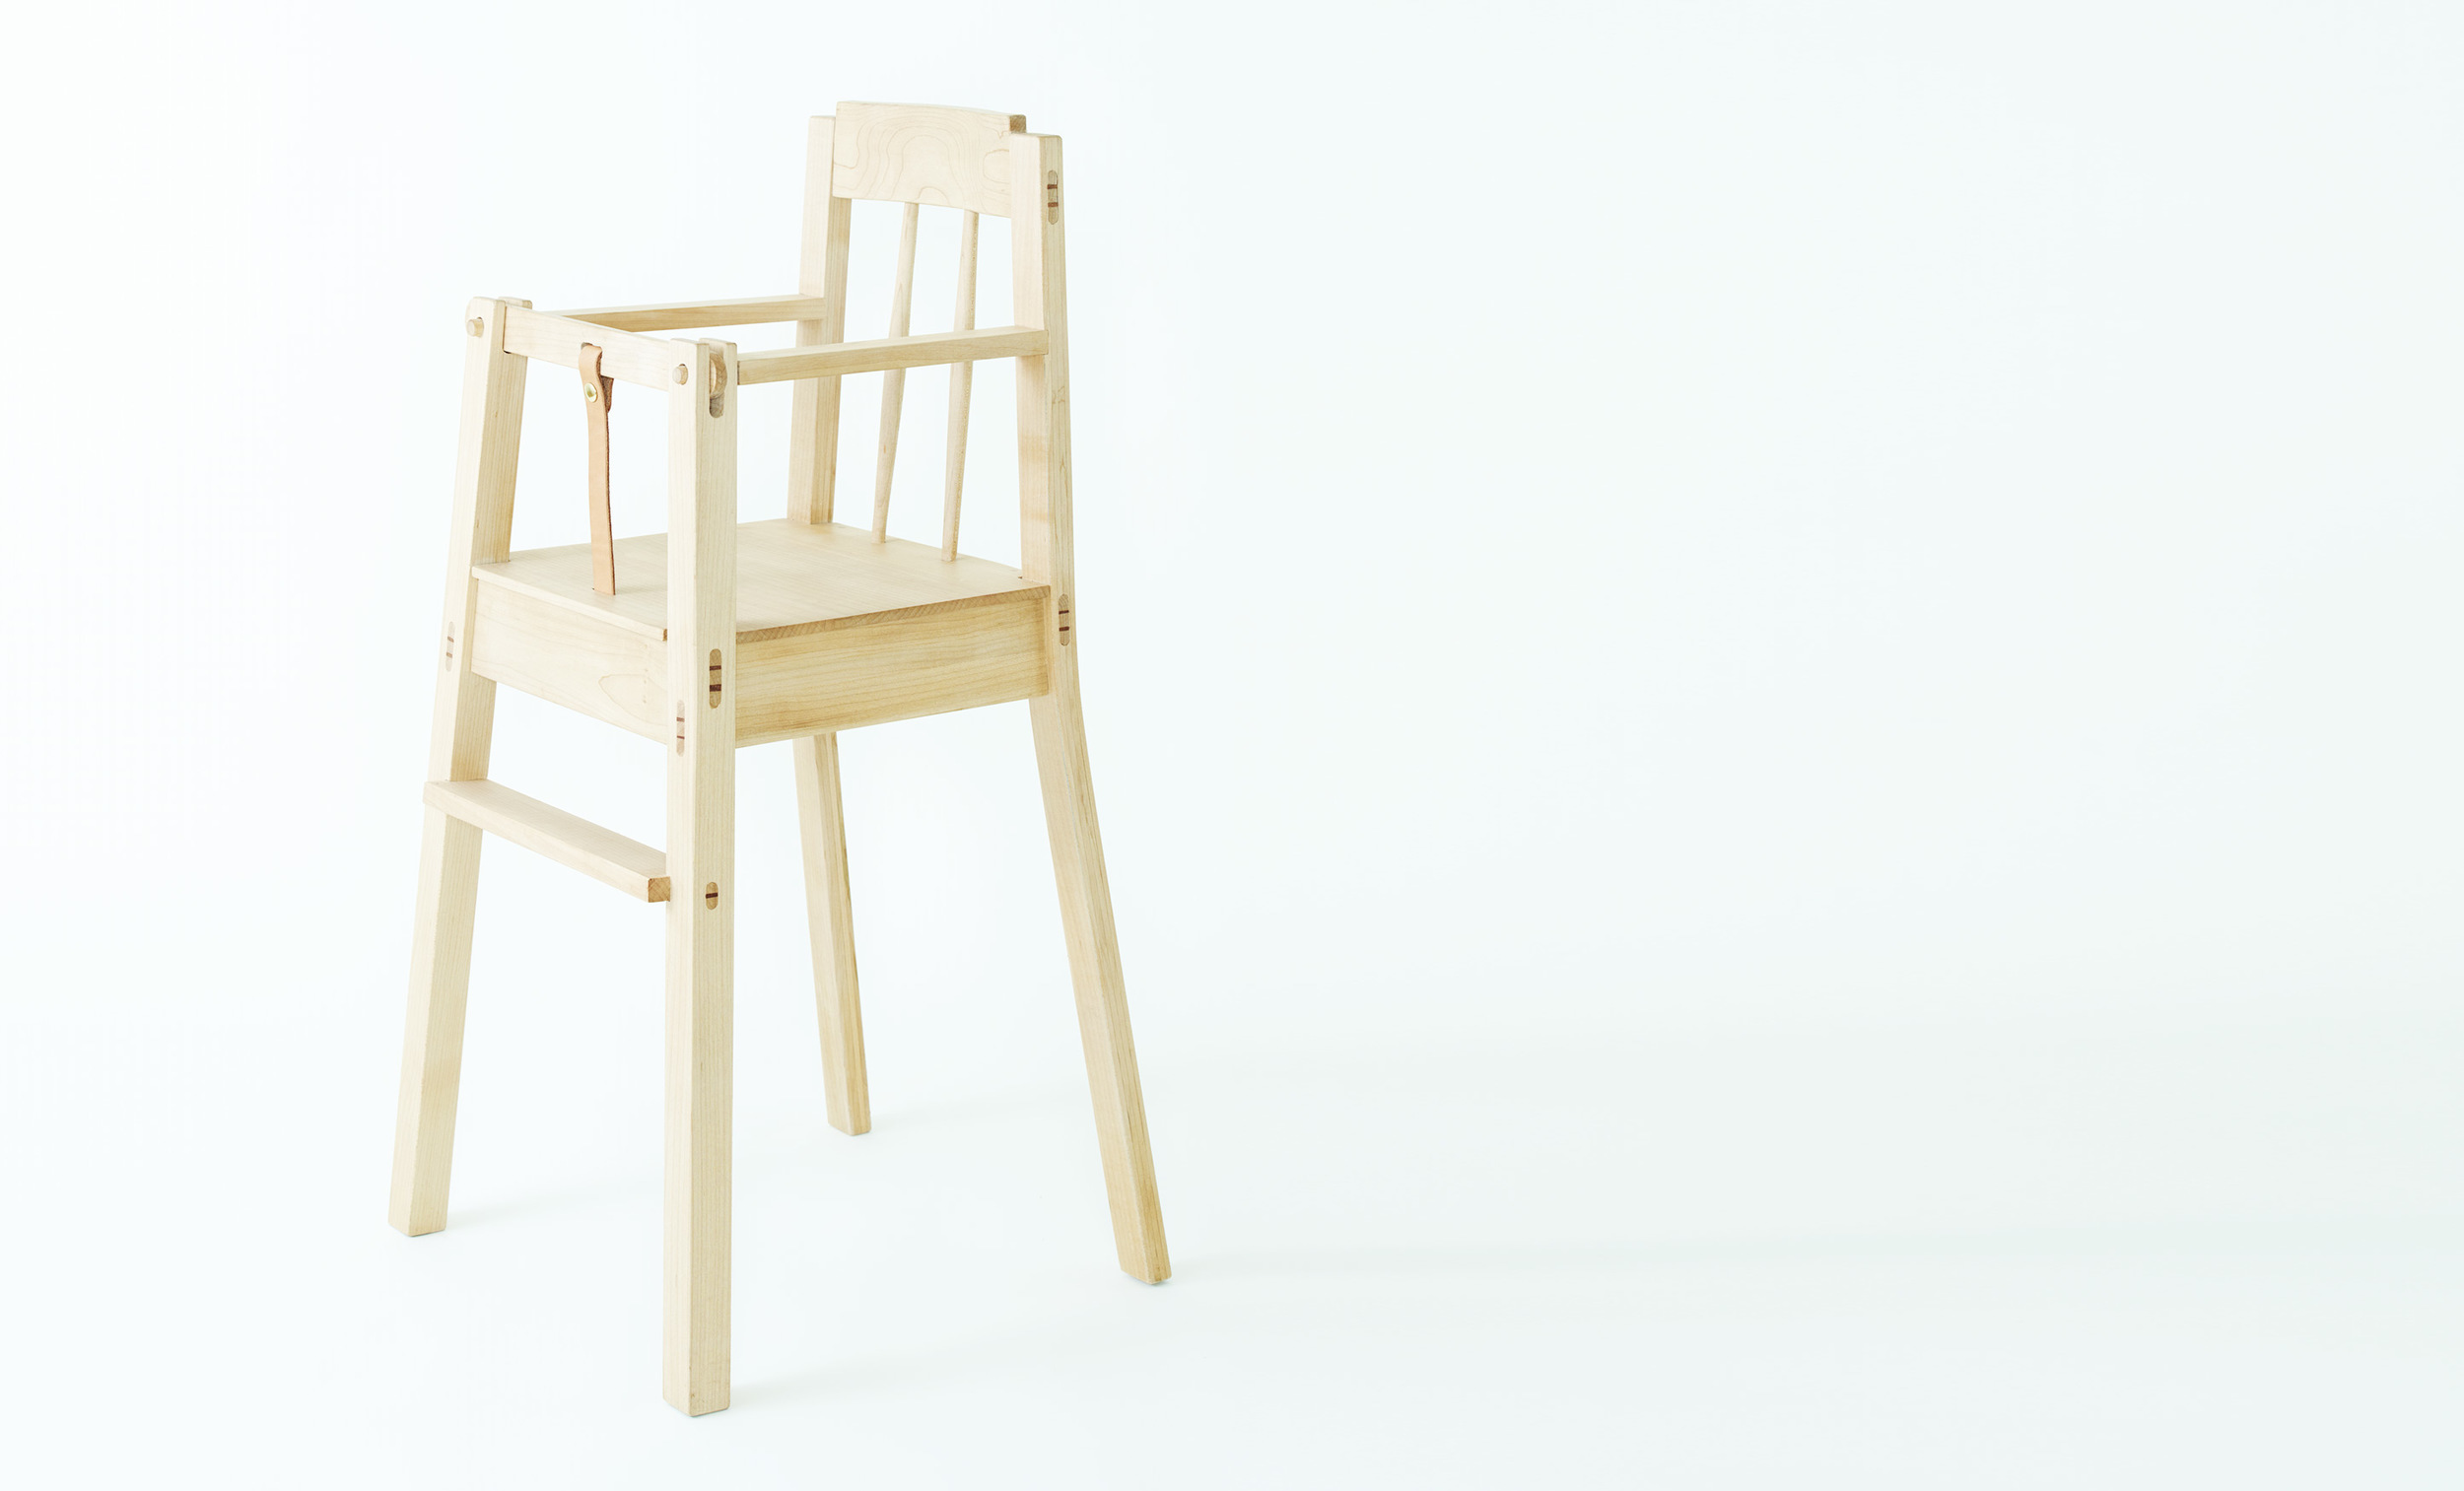  A chair that pulls right up to the table, so your child can join in the family meal from day one. Approximately 6 months to 4 years   Quality  Sustainable, local hardwoods, hand-picked for quality + character, solid wood joinery   Materials  Maple, 